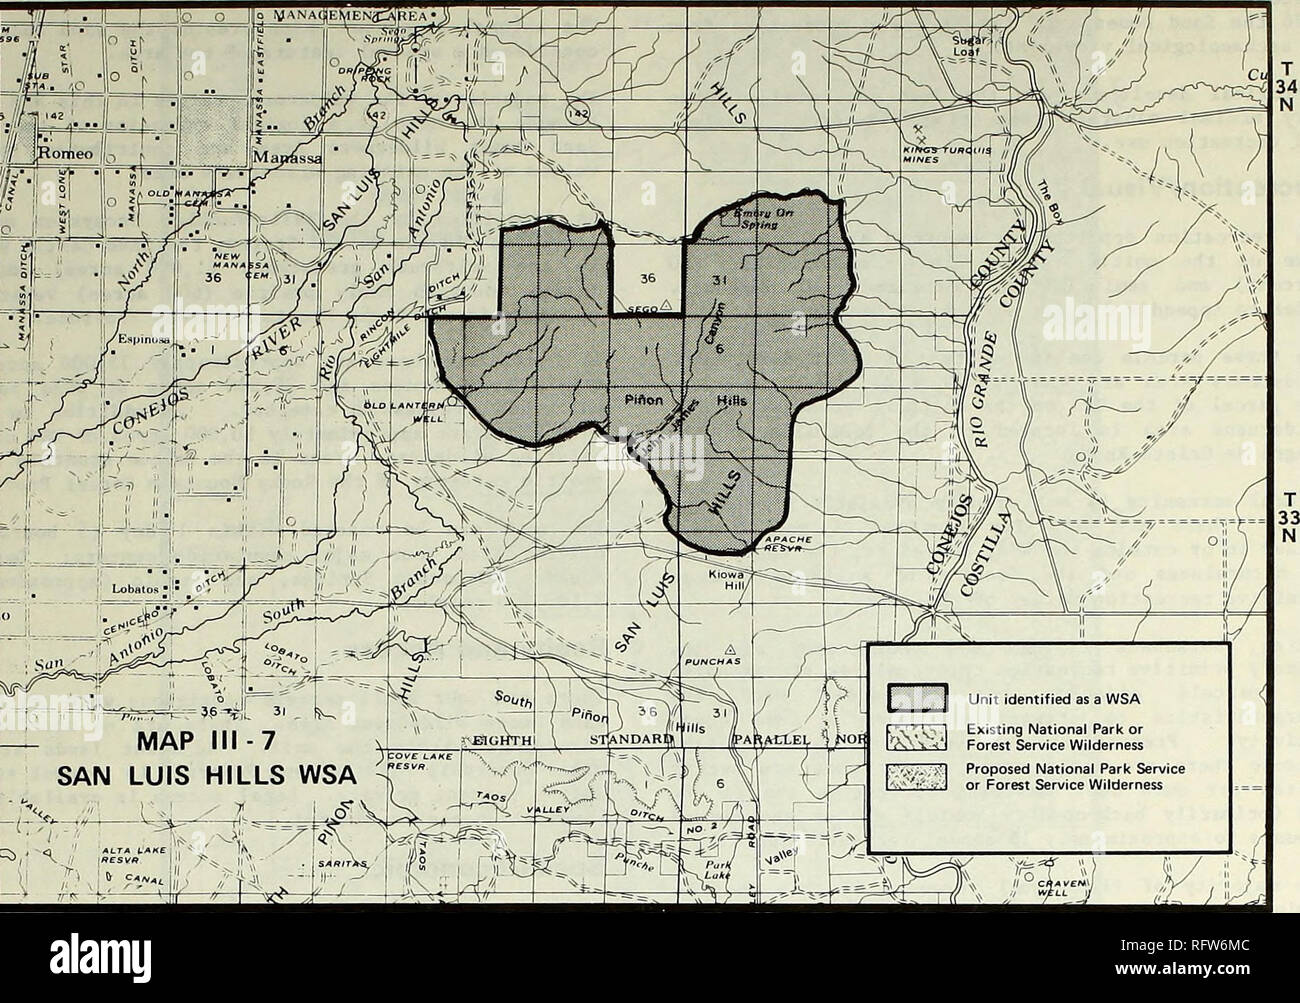 . Canon City District wilderness planning amendment. Wilderness areas; Land use. 46 CO-050-141 R 9 E N R 10E RUE MAP III-7 SAN LUIS HILLS WSA X ;. iREsvft S&gt;4fffr&gt;. !^ Mili-s SAN LUIS HILLS (141) This unit contains 10,240 acres of land located approximately 3 miles southeast of Manassa. The WSA lies within T. 33 N.. R. 10 and 11 E., T. 34 N., R. 10 and 11 E., NMPM. (See Map III-7.) Air This unit is considered Class II by Federal Air Quality Standards* Geology and Minerals This unit is located at the confluence of two major structural trends. Ore deposits are commonly localized at such tr Stock Photo